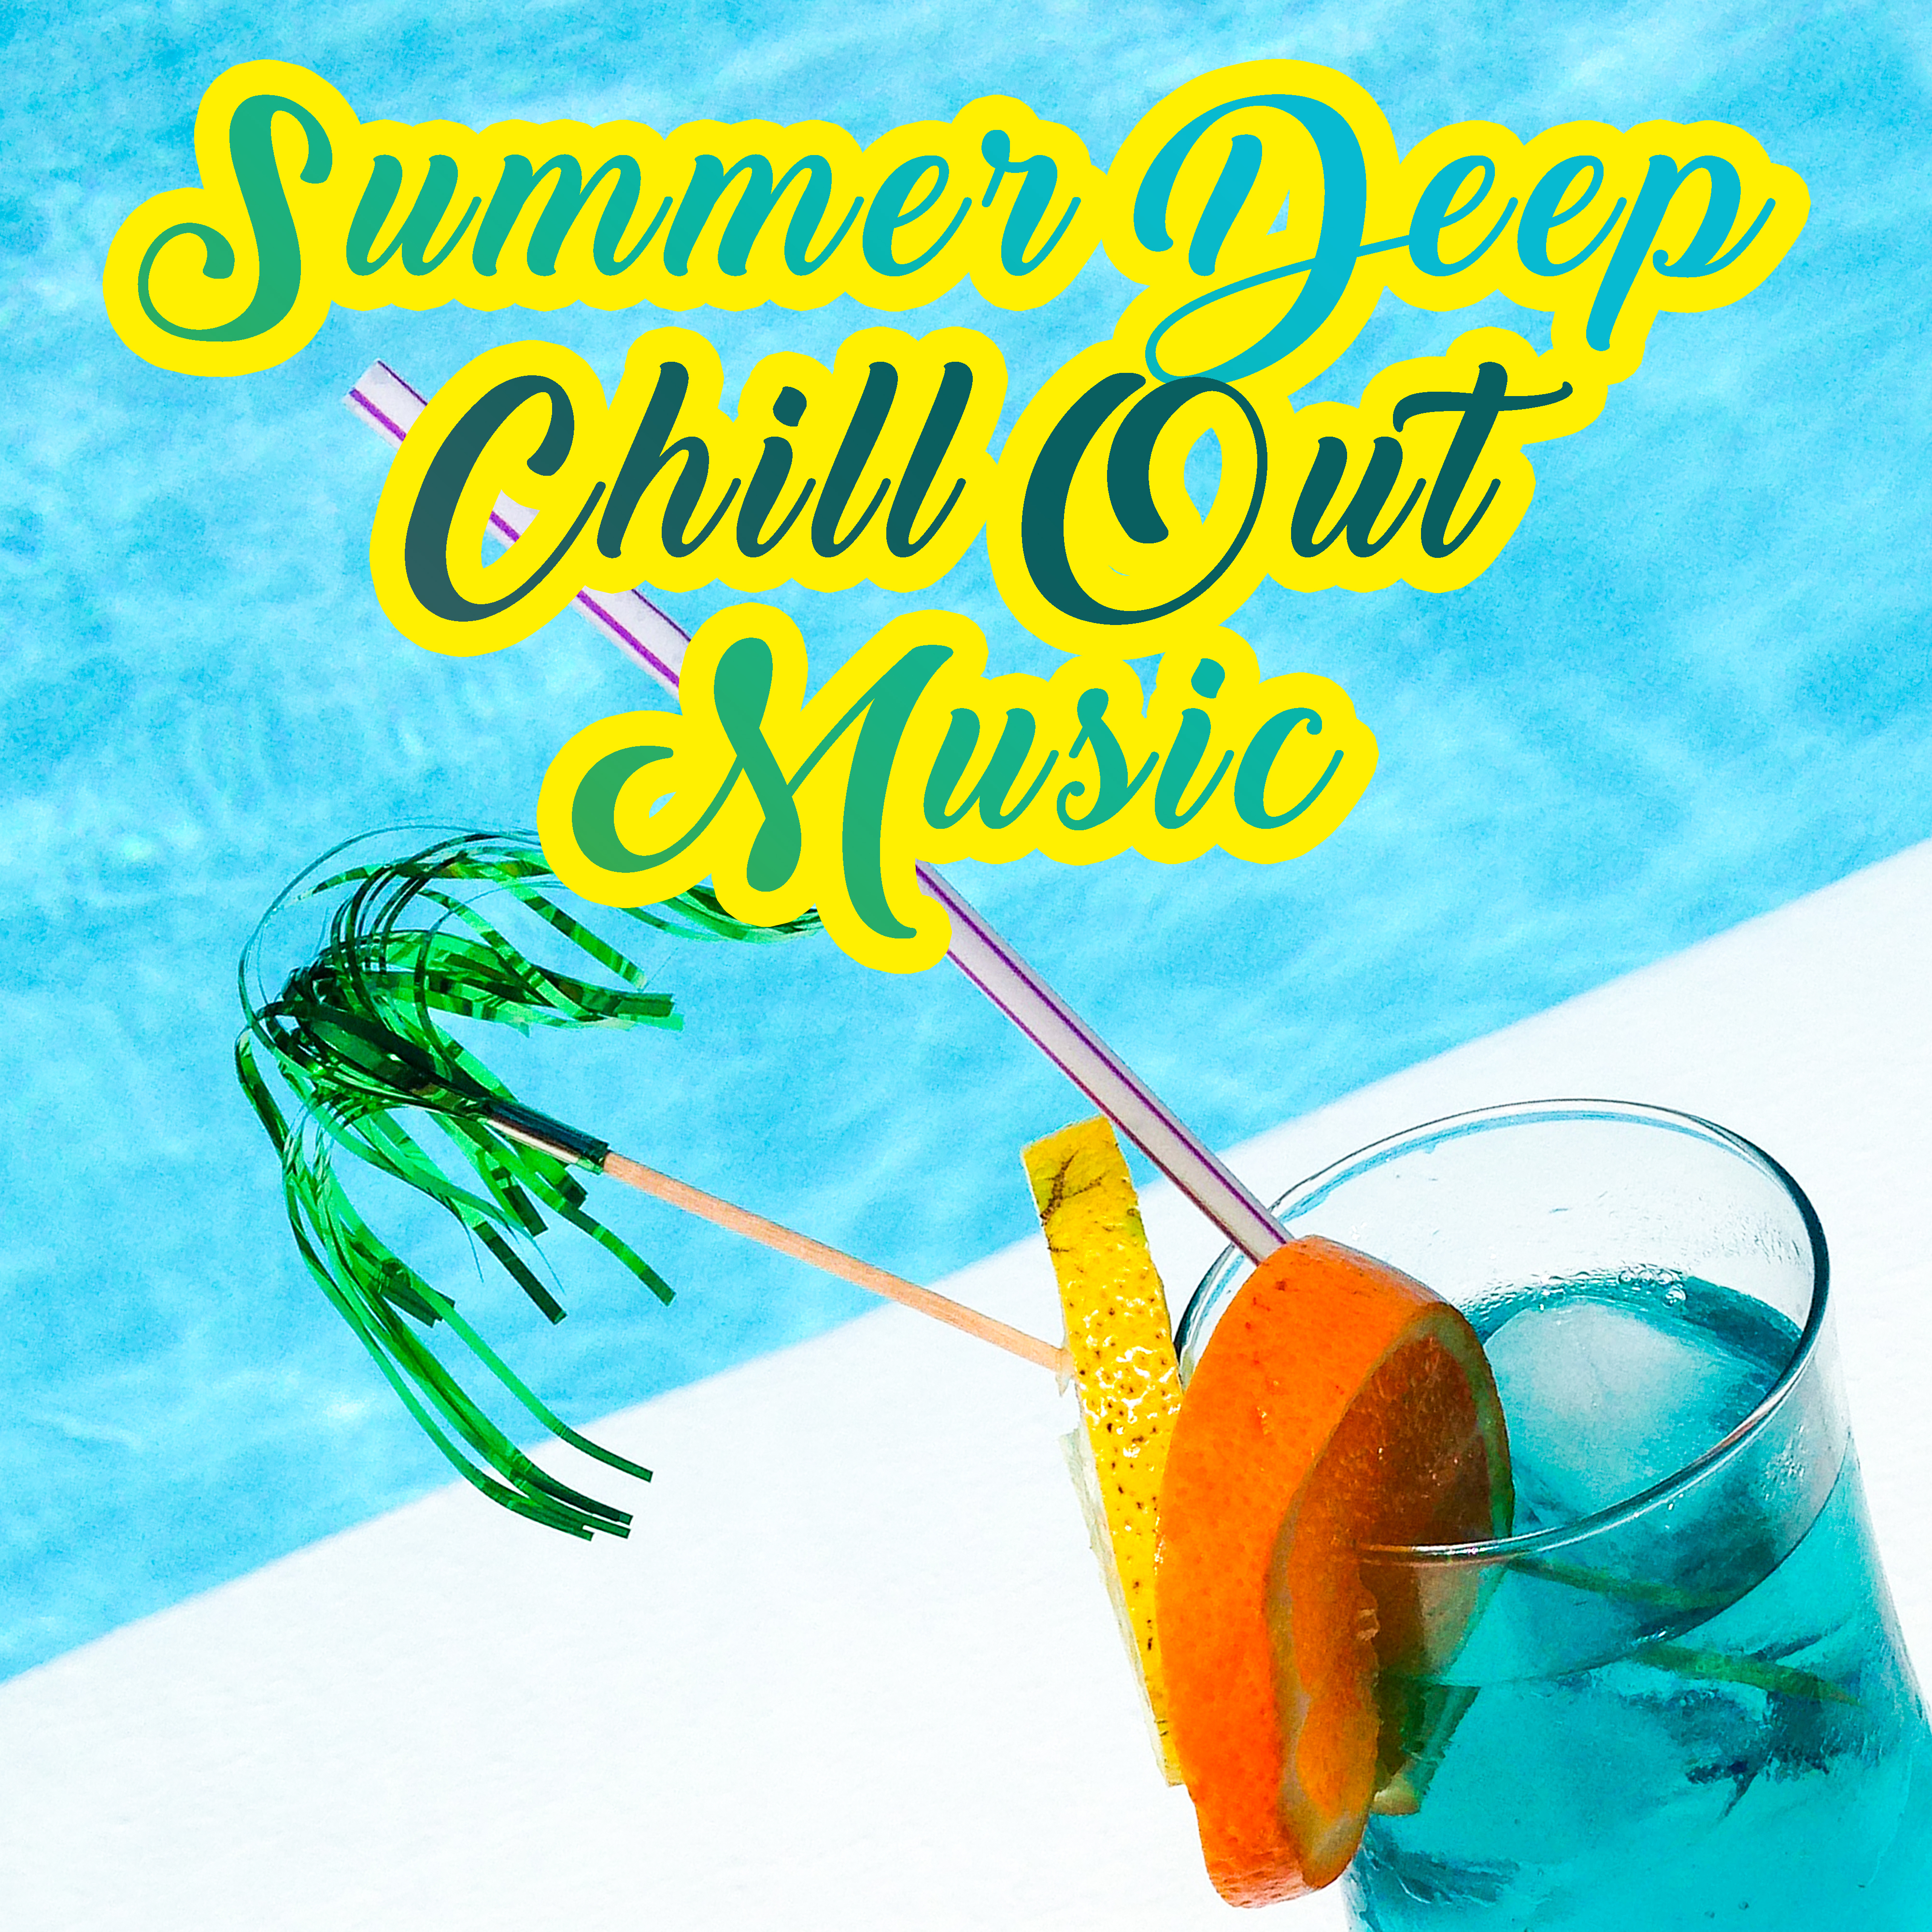 Summer Deep Chill Out Music – Calming Sounds, Chill Out Relaxation, Stress Free, Summer 2017, Ibiza Beach Rest